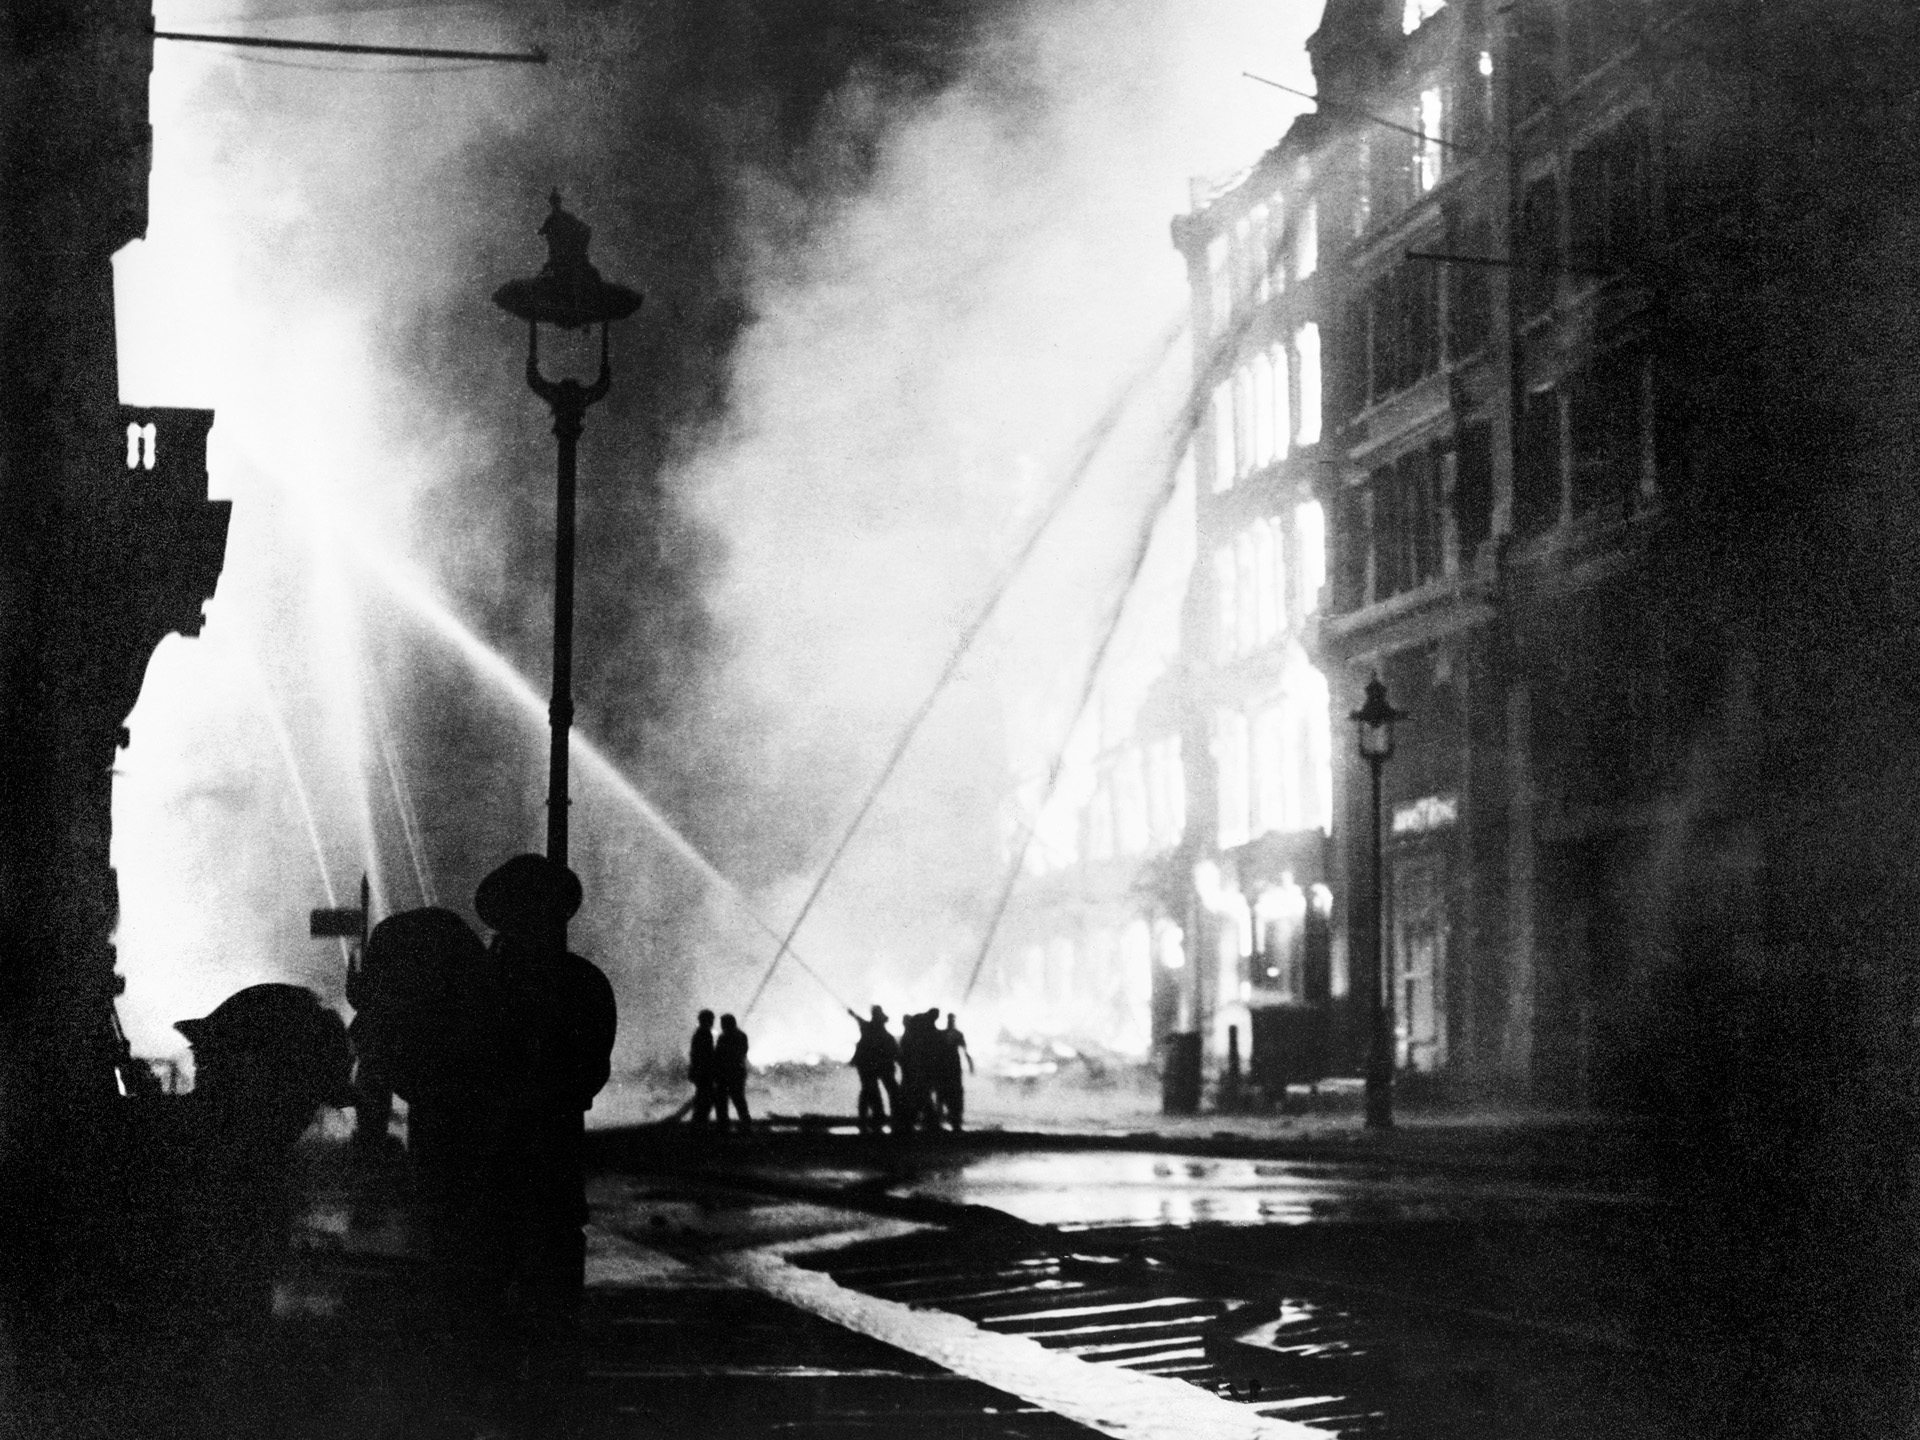 Firefighters of the London Fire Brigade bravely battle a conflagration on Queen Victoria Street with water hoses during the devastating Nazi air raid on the capital city on May 10, 1941. The raid lasted for six hours and killed 1,486 people while destroying an estimated 11,000 homes and damaging both houses of Parliament, the British Museum, and St. James Palace. 